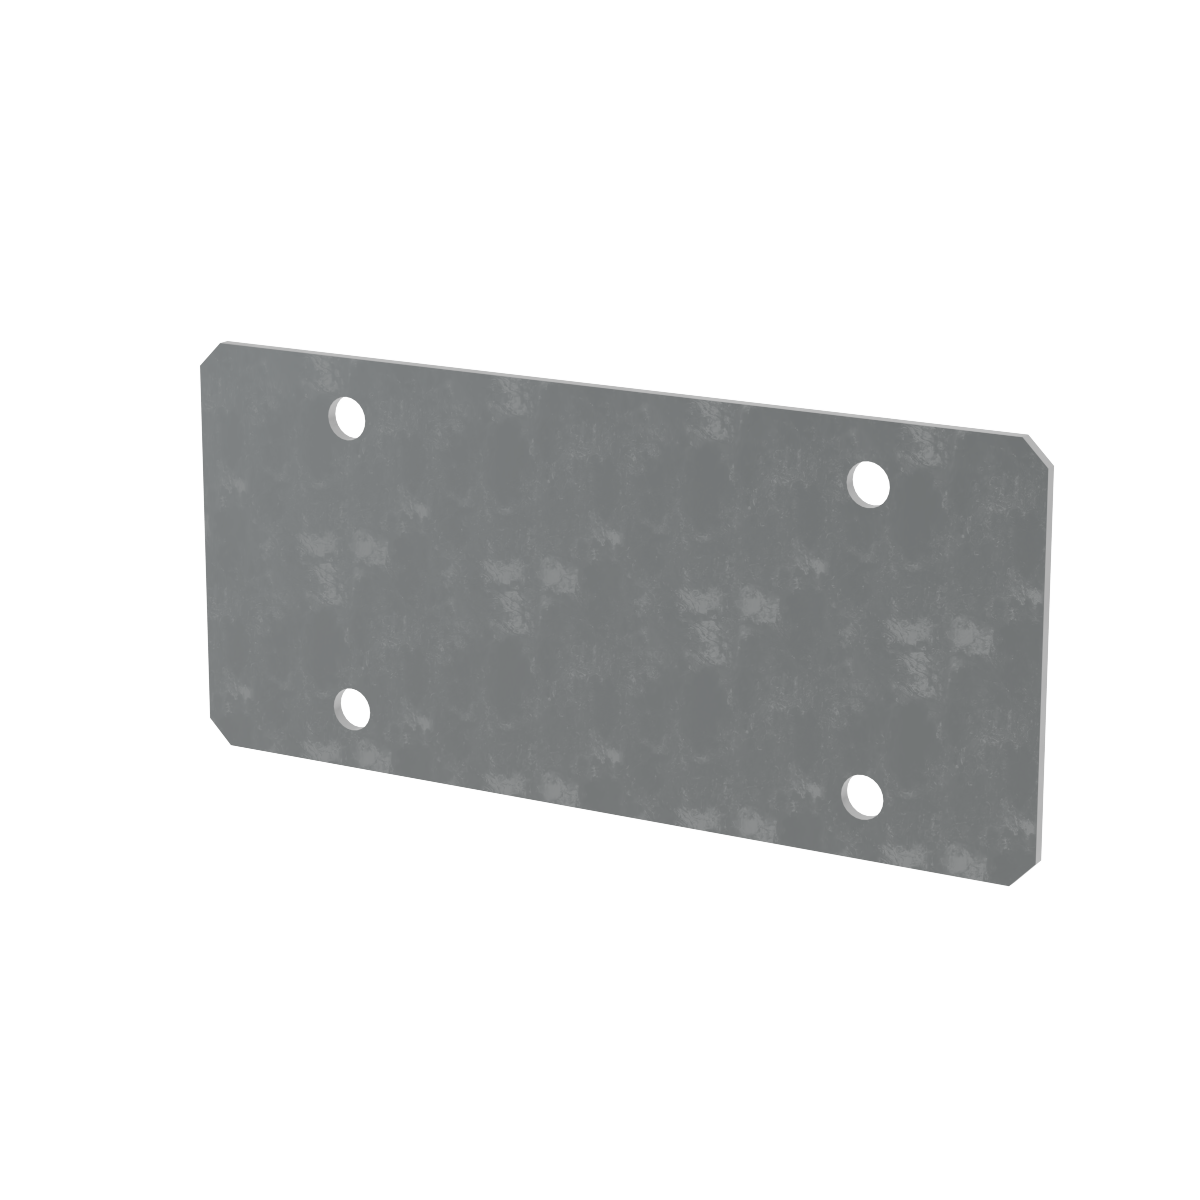 Backup plate for surface mount handle